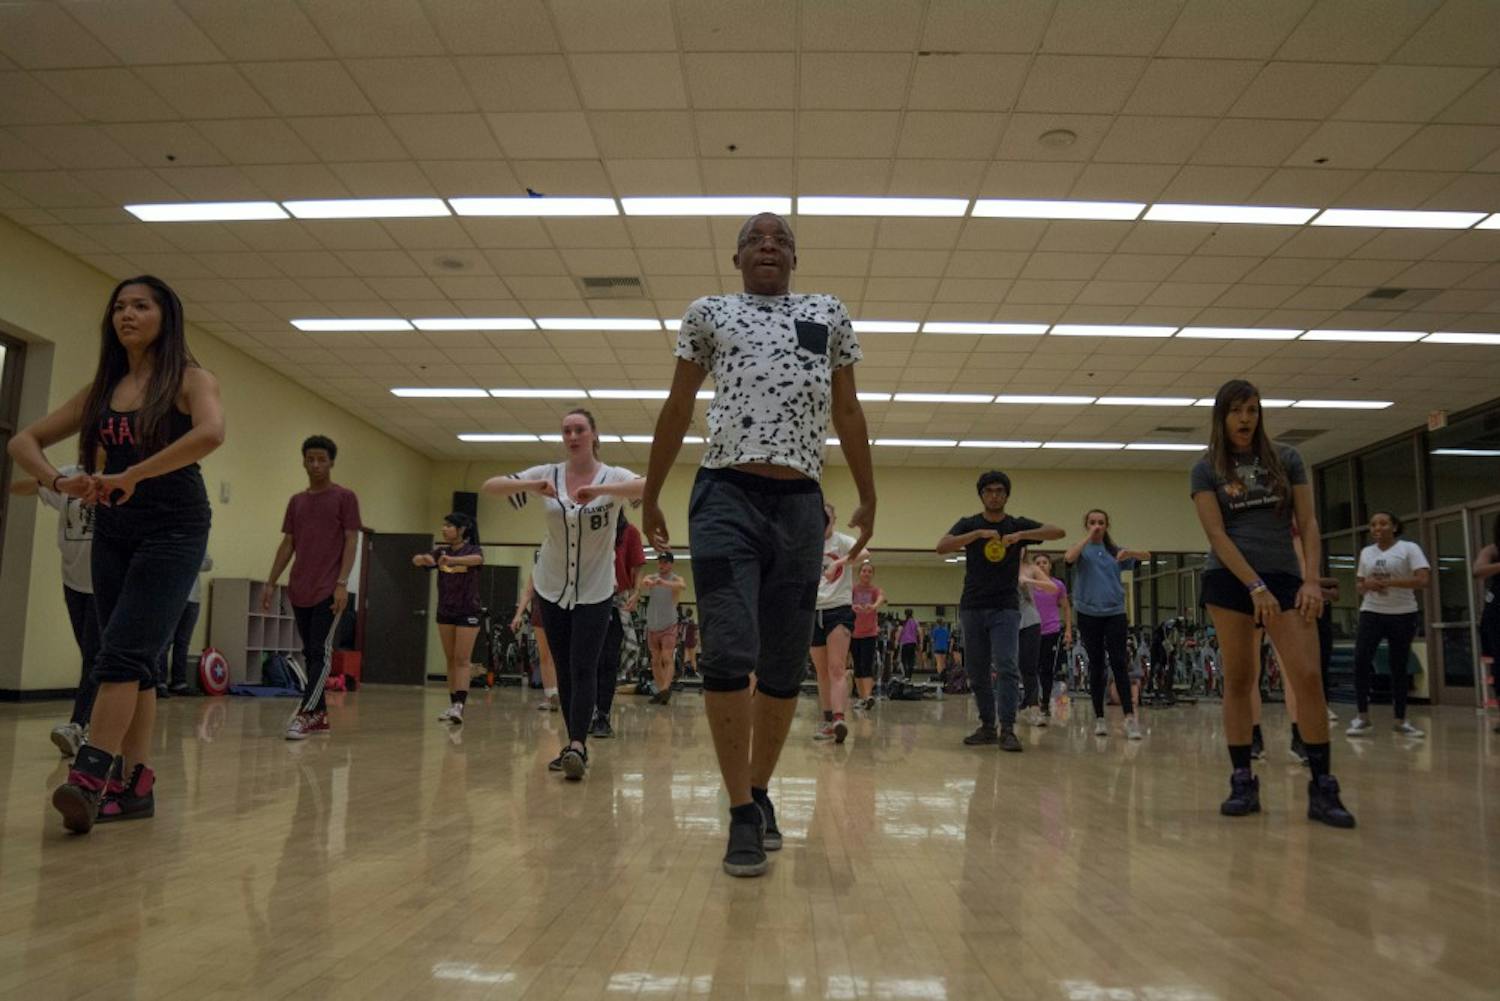 Choreographer Darrell Wilmore teaches the Hip Hop Coalition a new dance during practice on Tuesday, April 19, 2016, in the Tempe SDFC.